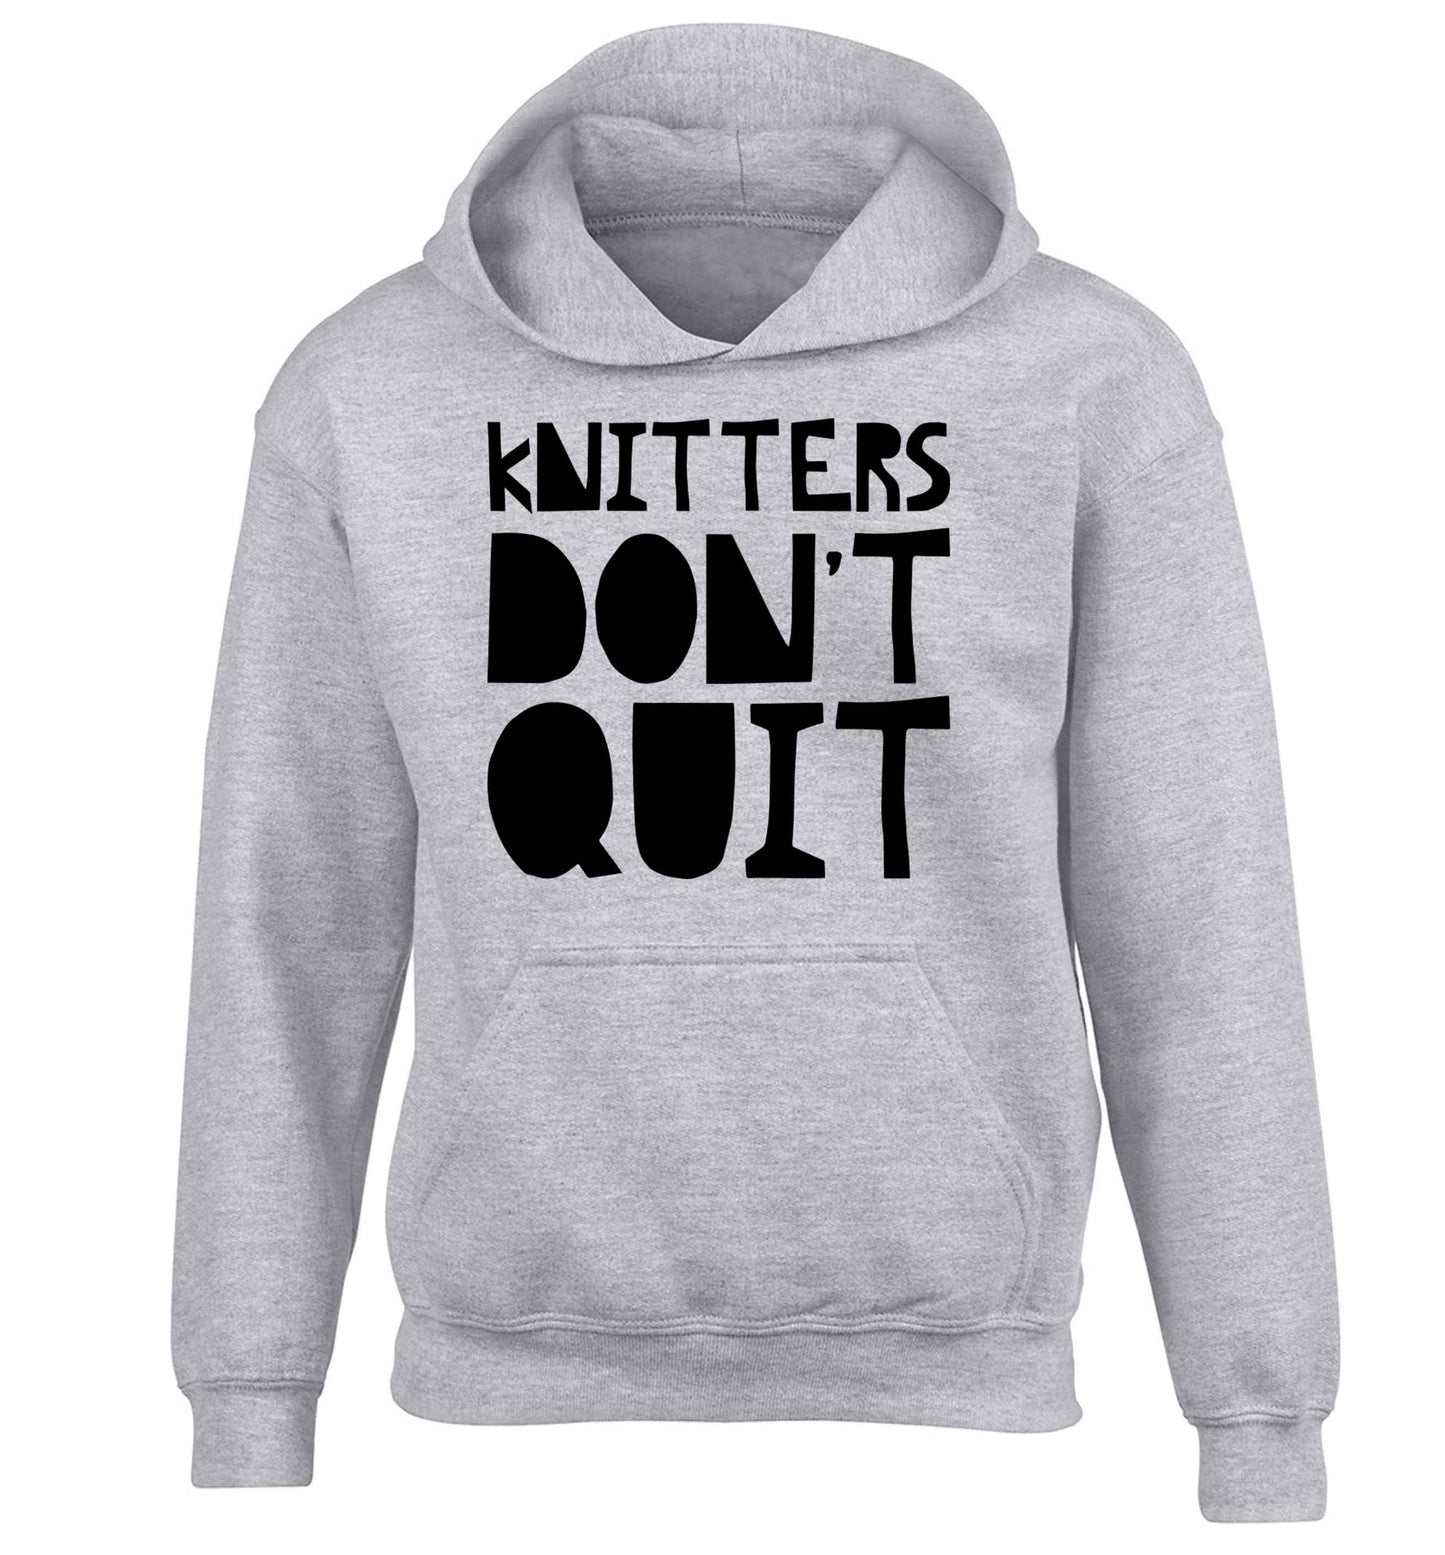 Knitters don't quit children's grey hoodie 12-13 Years